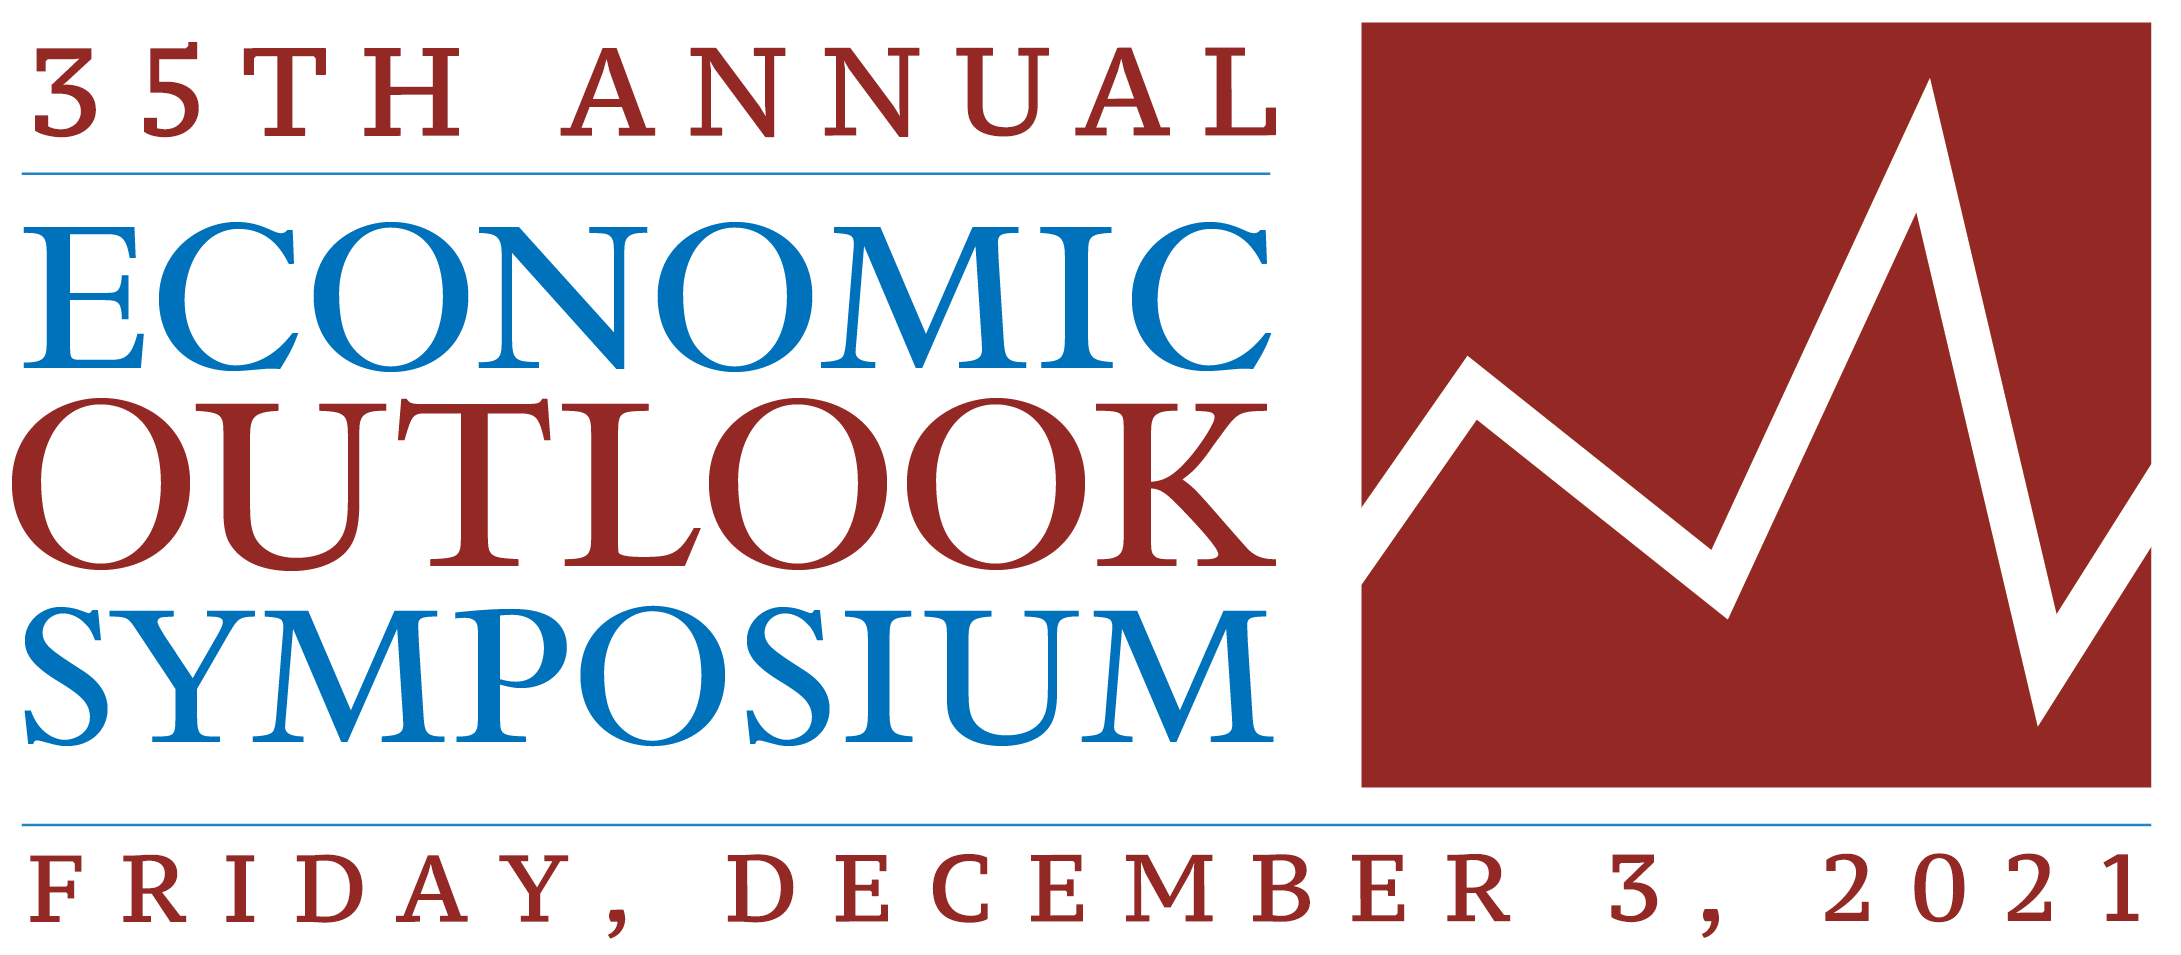 35th Annual Economic Outlook Symposium, Friday, December 3, 2021